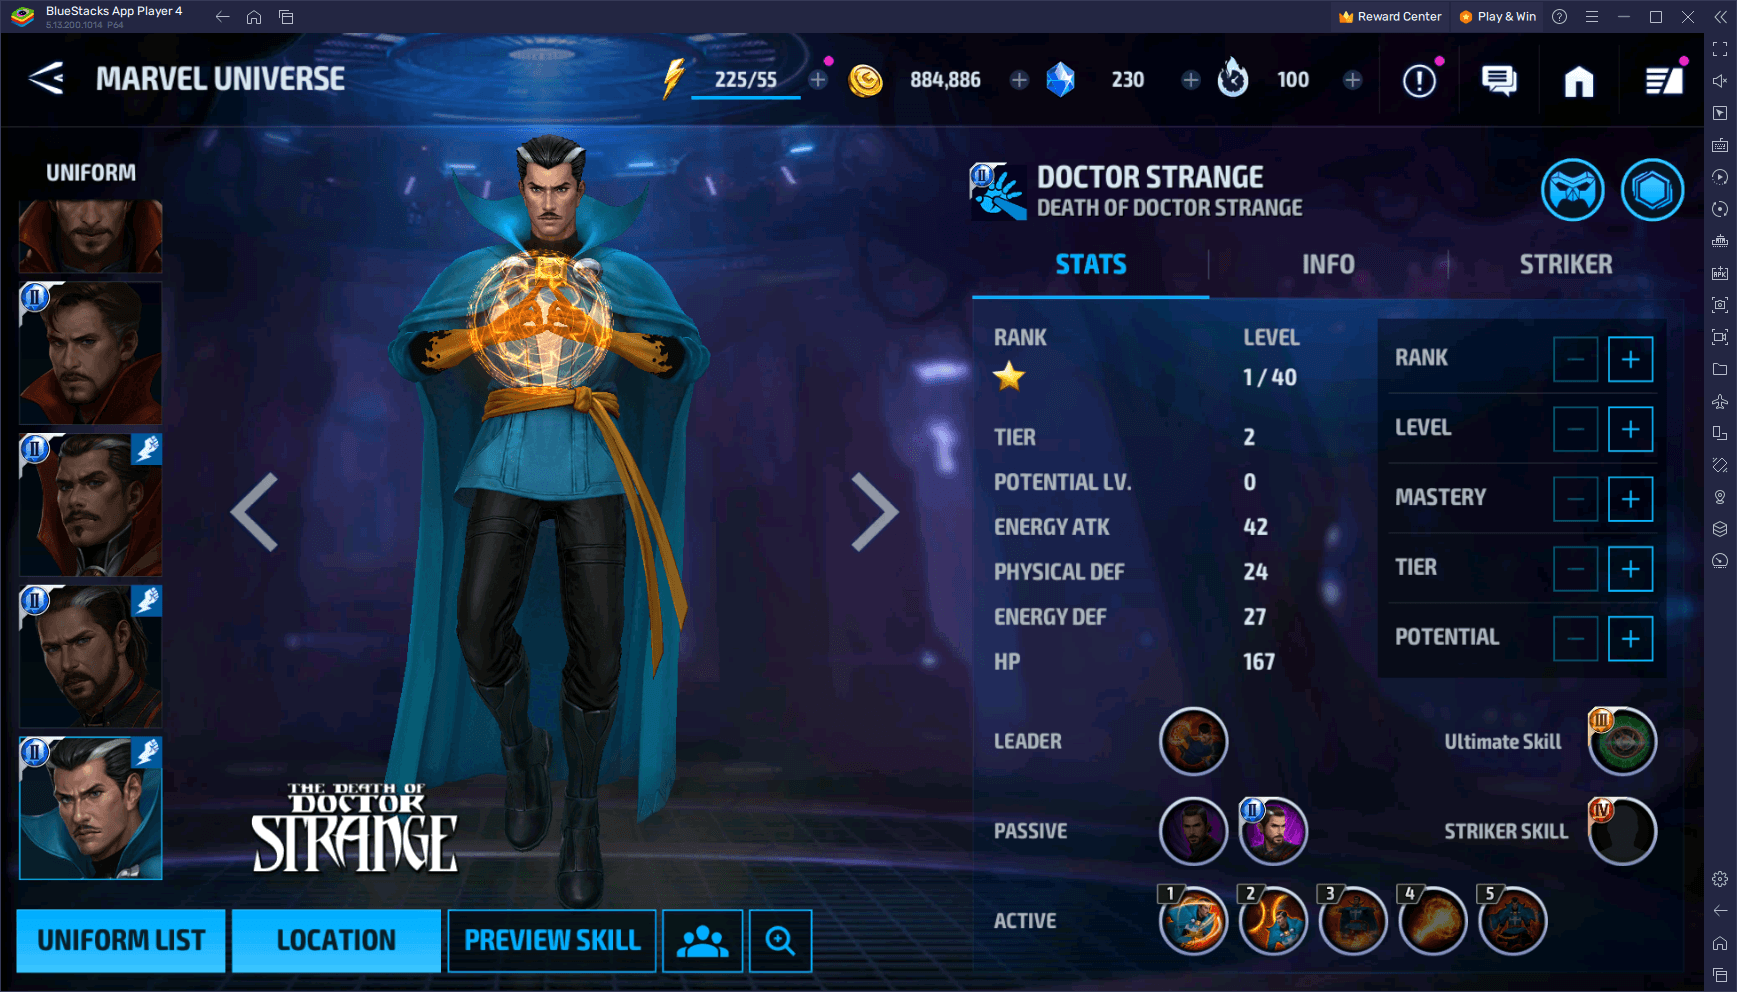 MARVEL Future Fight Unleashes Midnight Suns - New Character and Uniforms